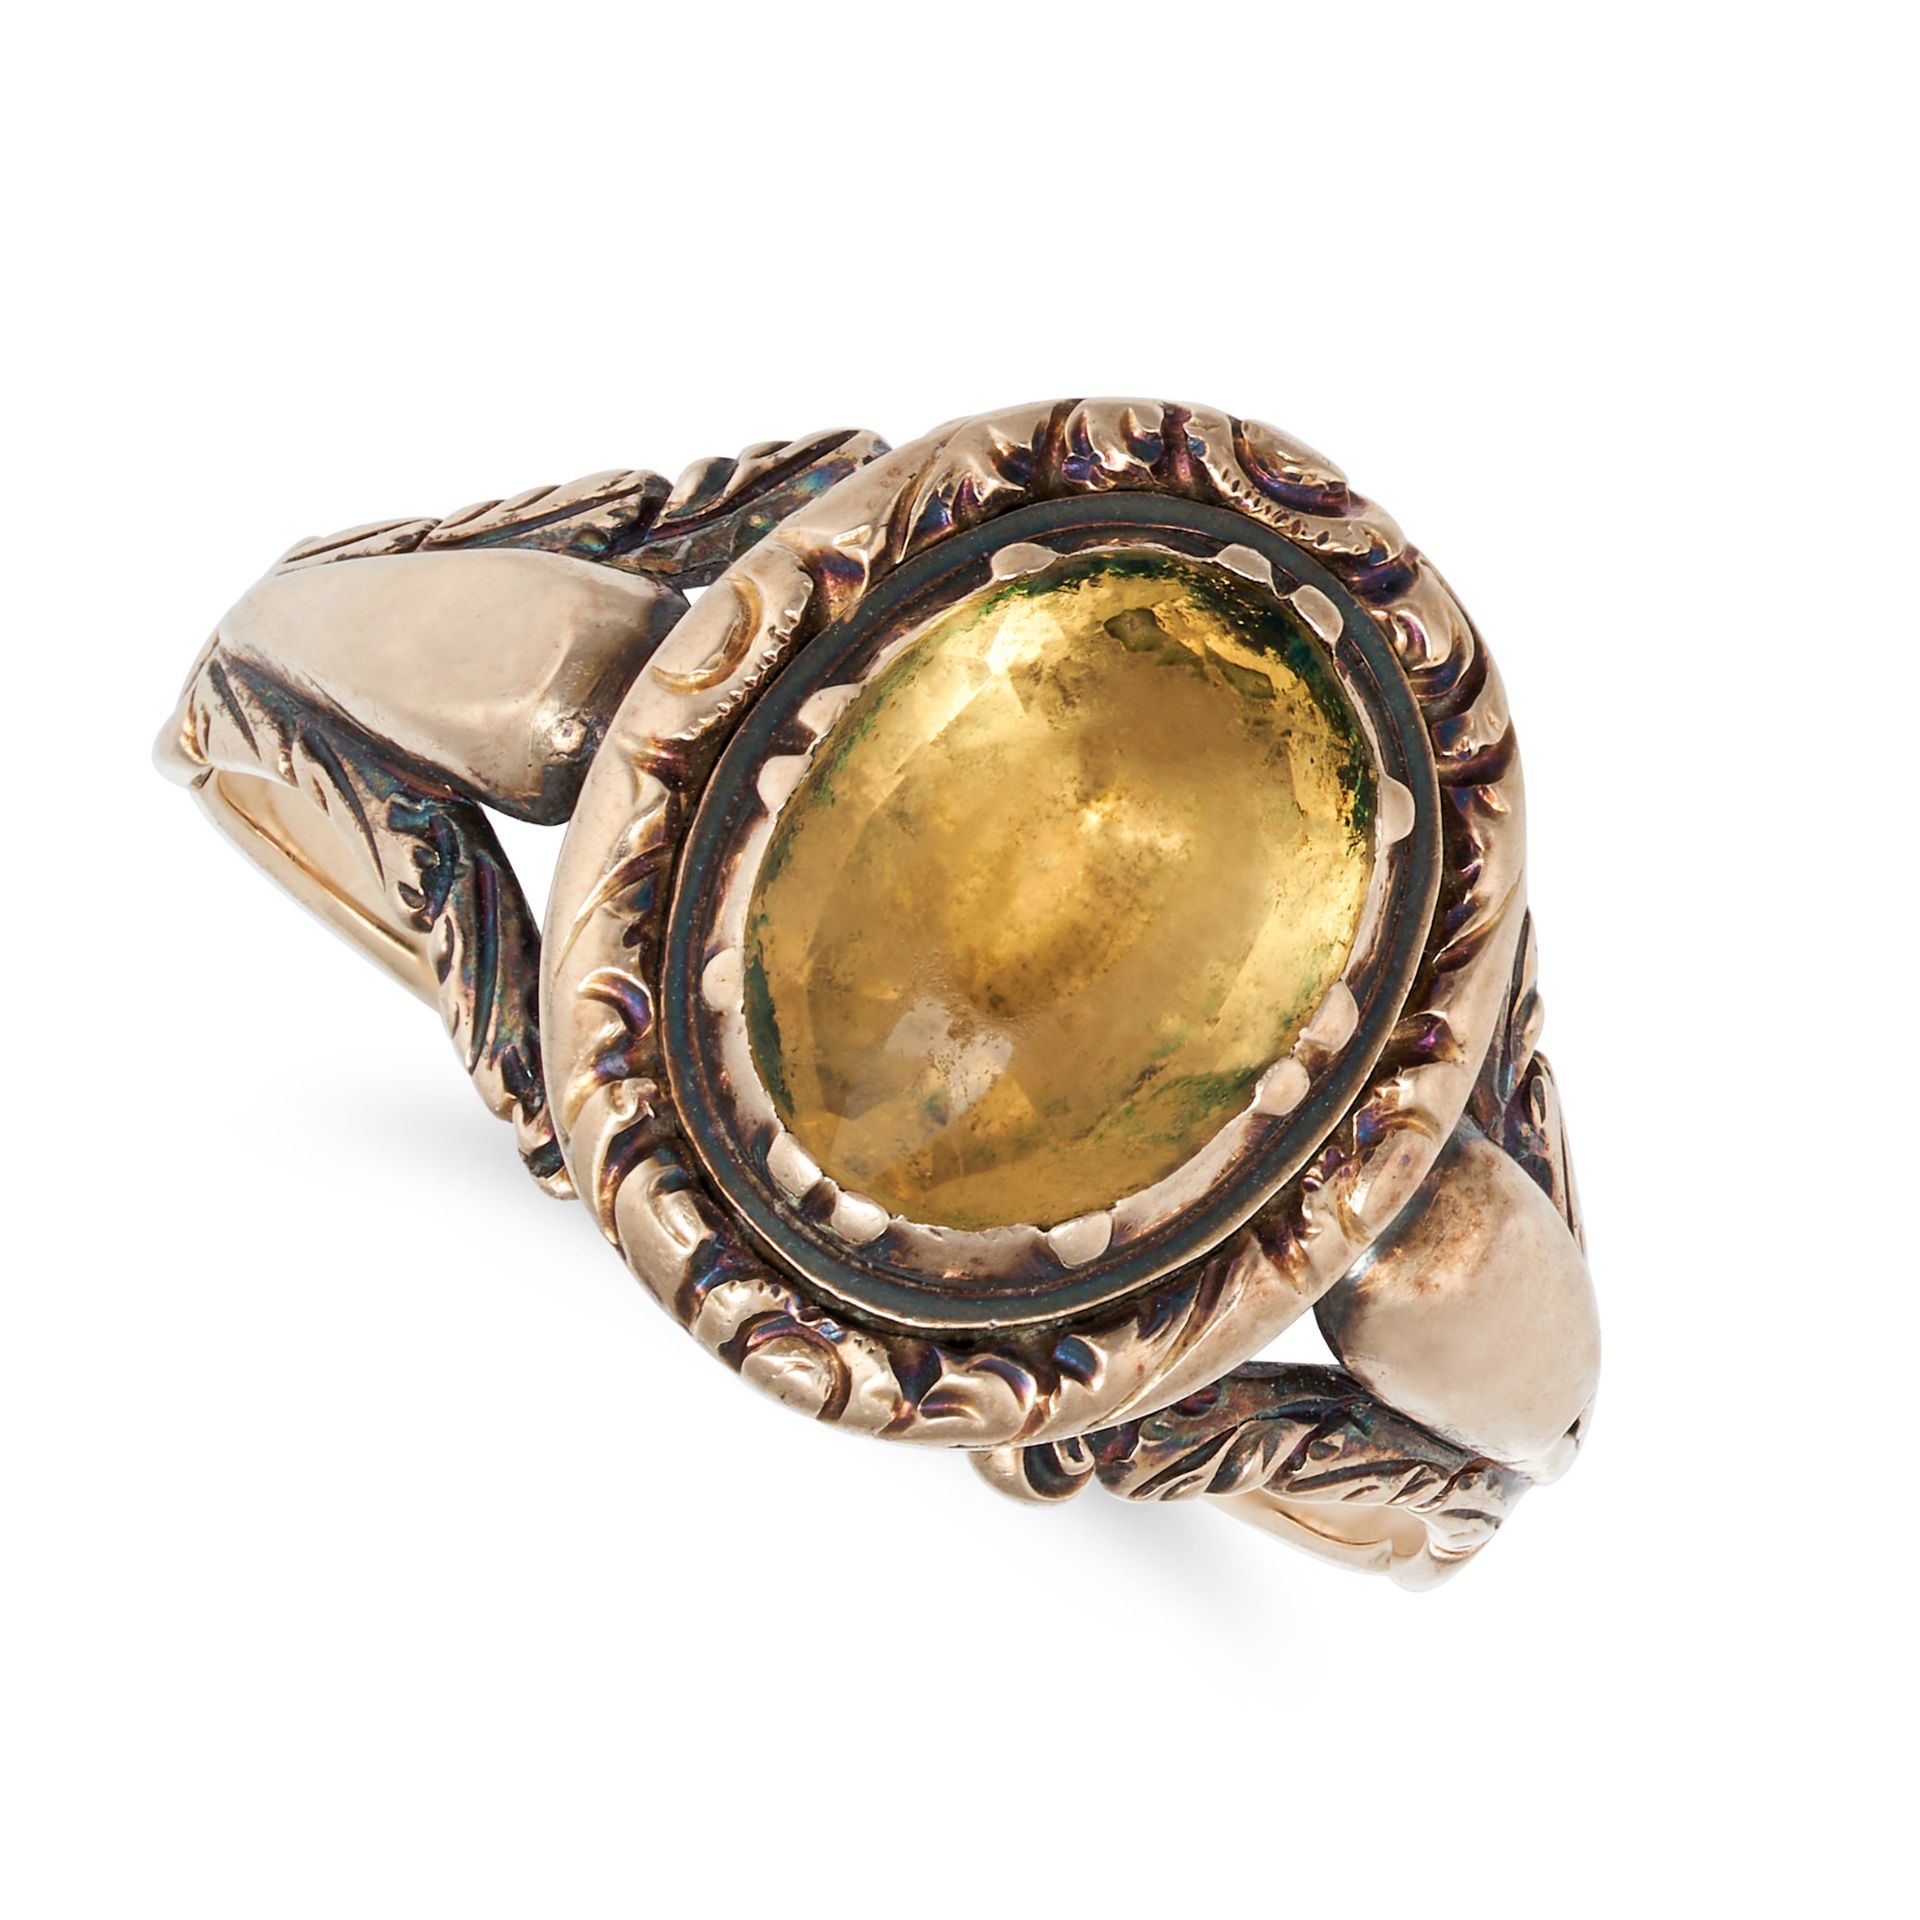 NO RESERVE - AN ANTIQUE CITRINE RING in yellow gold, set with an oval cut citrine, no assay marks...